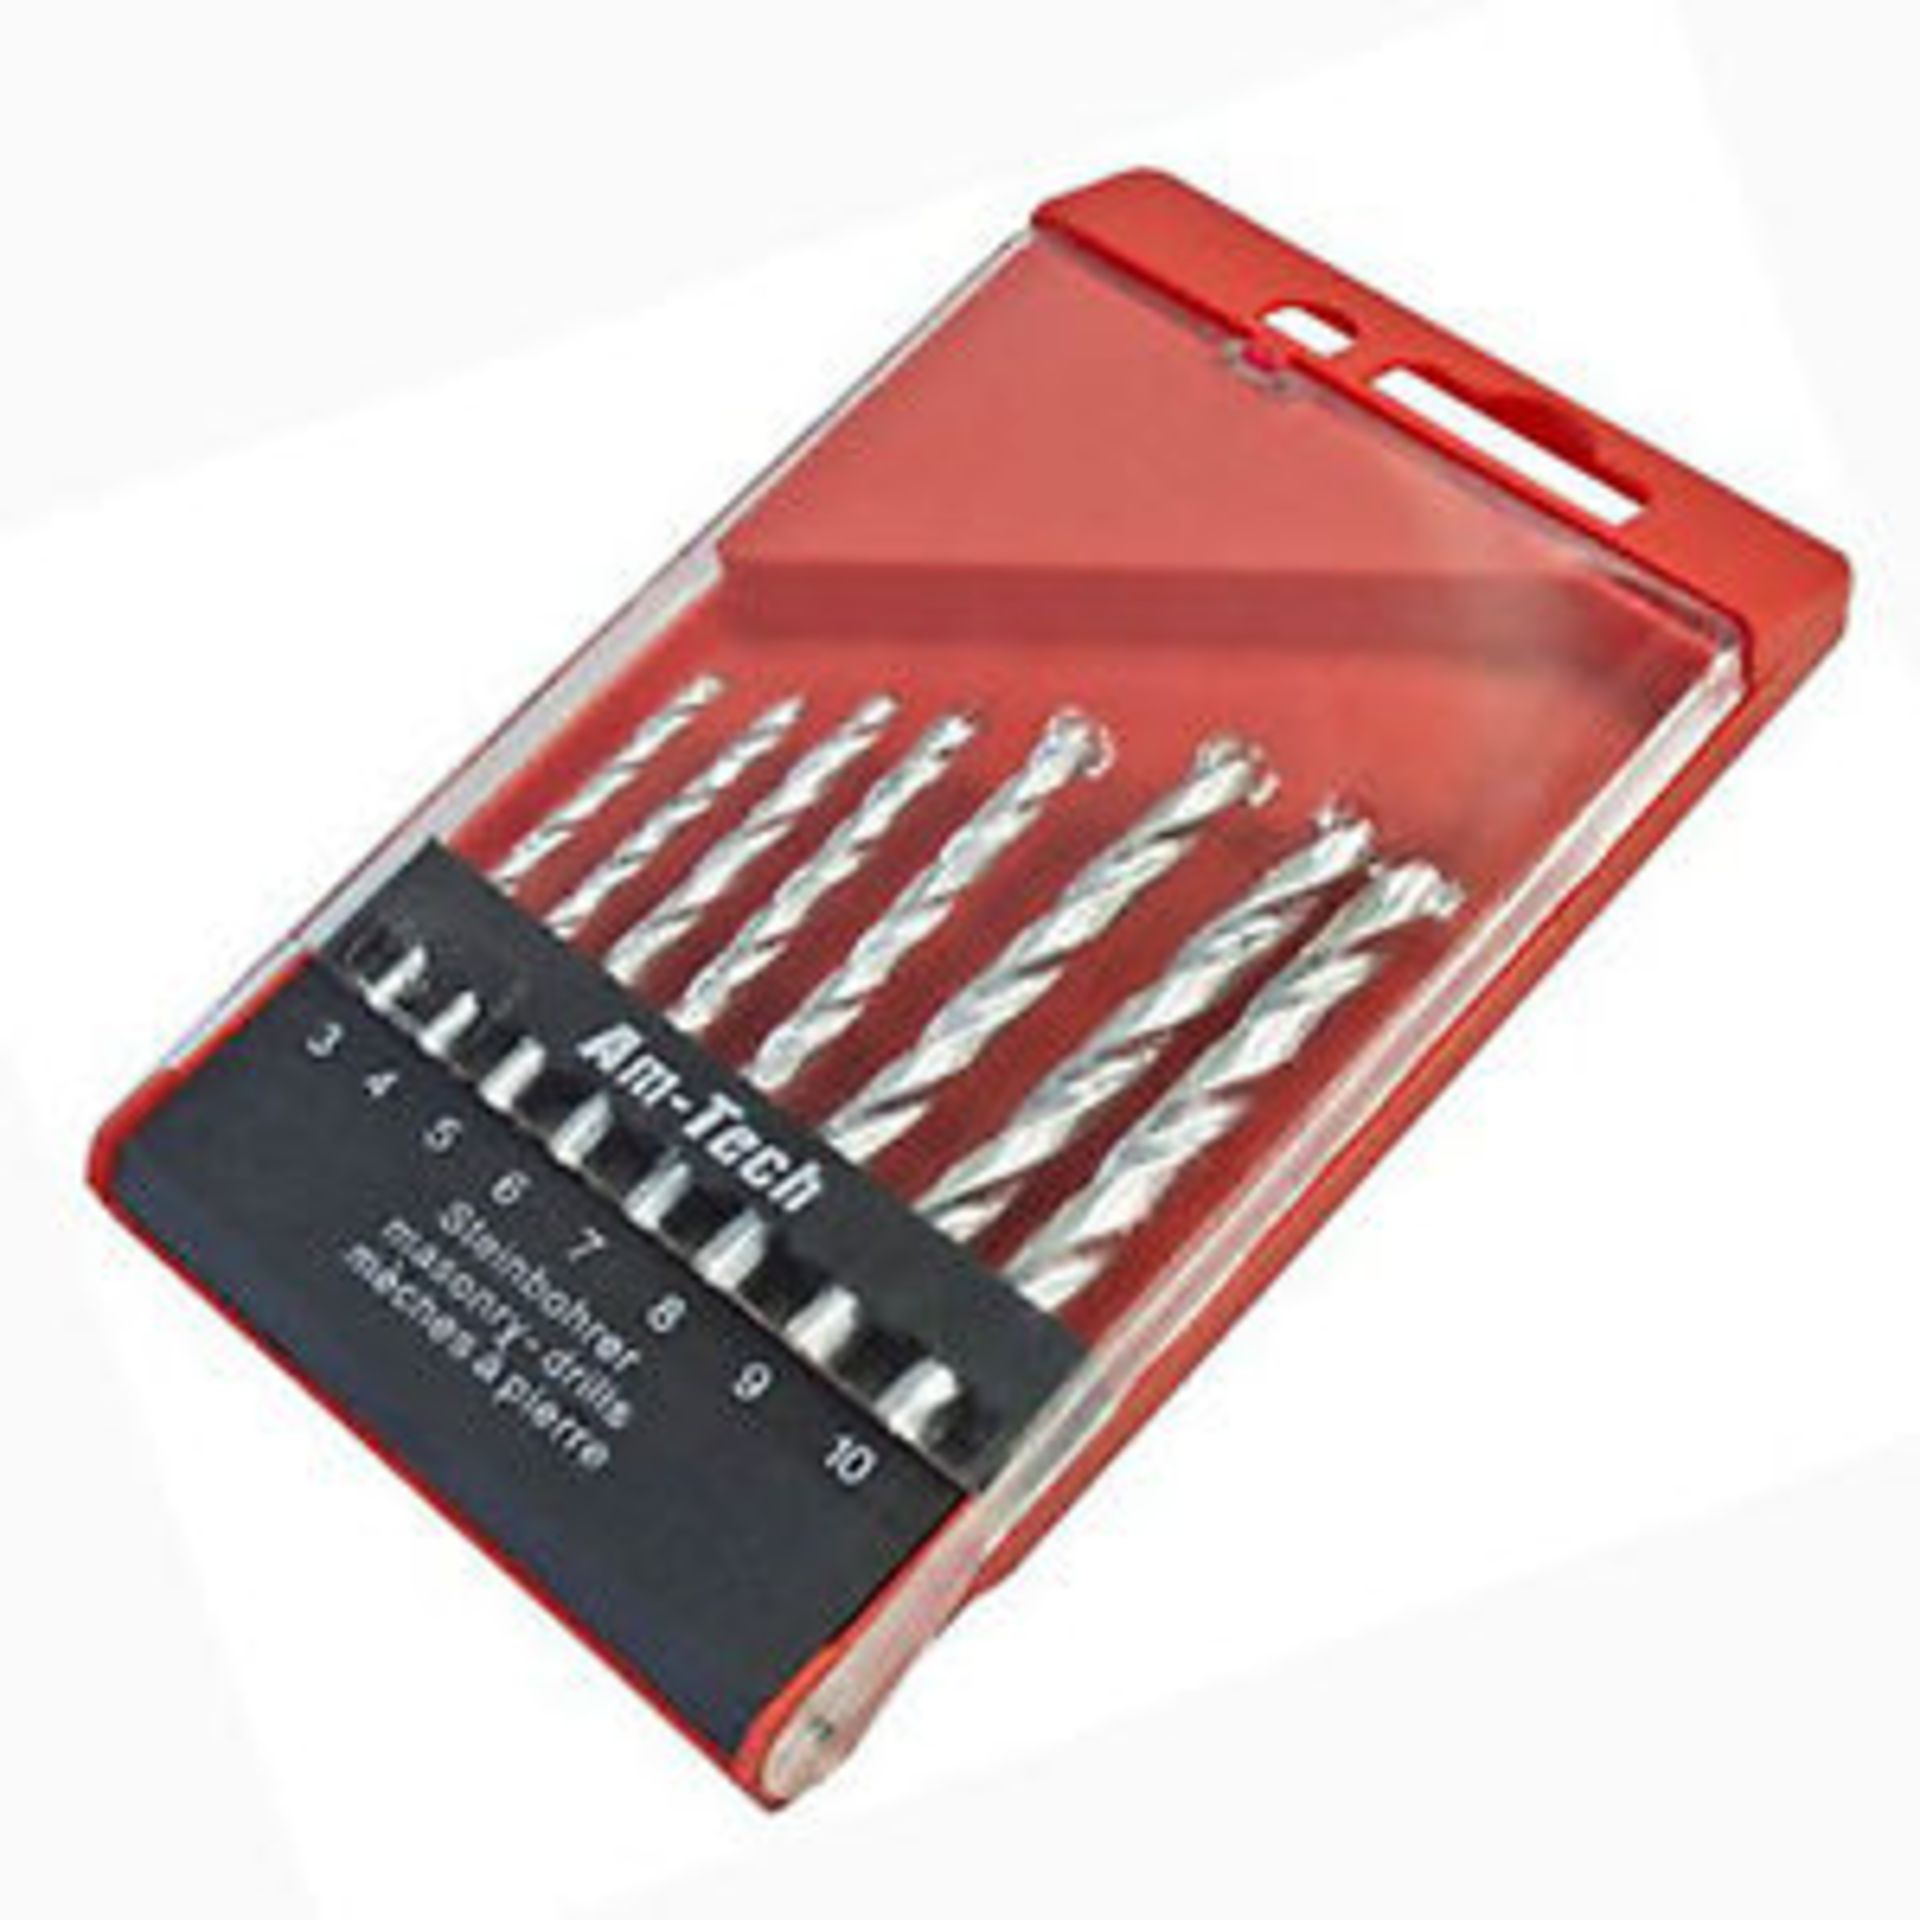 V *TRADE QTY* Brand New 8pc Masonry Drill Bit Set X 7 YOUR BID PRICE TO BE MULTIPLIED BY SEVEN